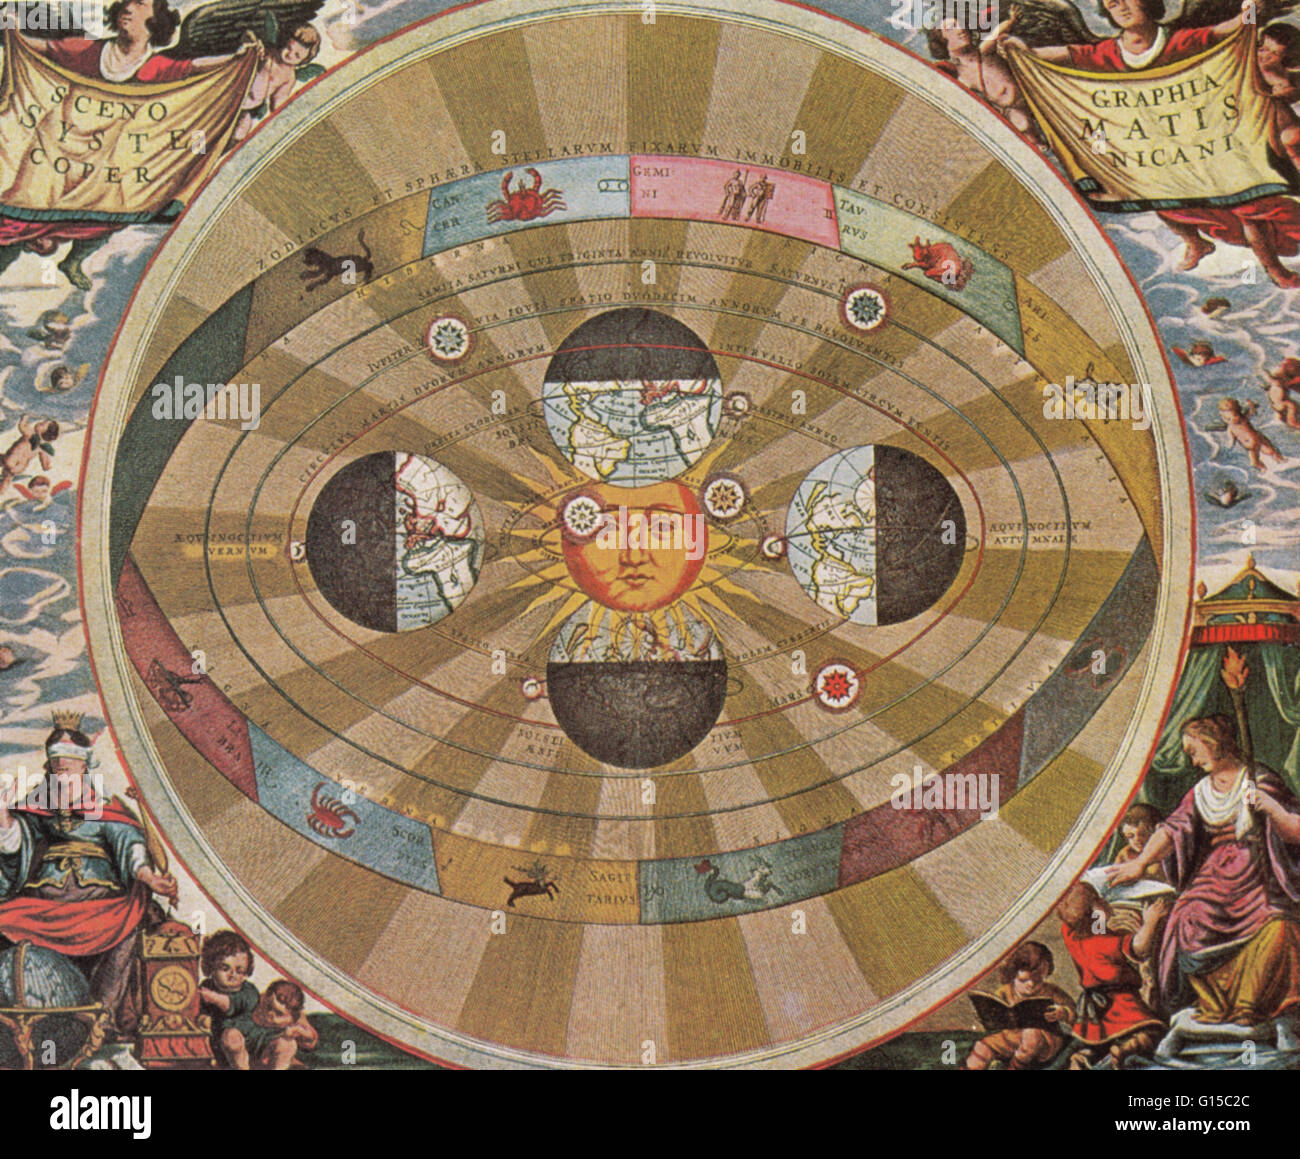 Scenographia Systematis Copernicani, Scenography of the Copernican world system. Copernican heliocentrism is the name given to the astronomical model developed by Nicolaus Copernicus and published in 1543. It positioned the Sun near the center of the Univ Stock Photo